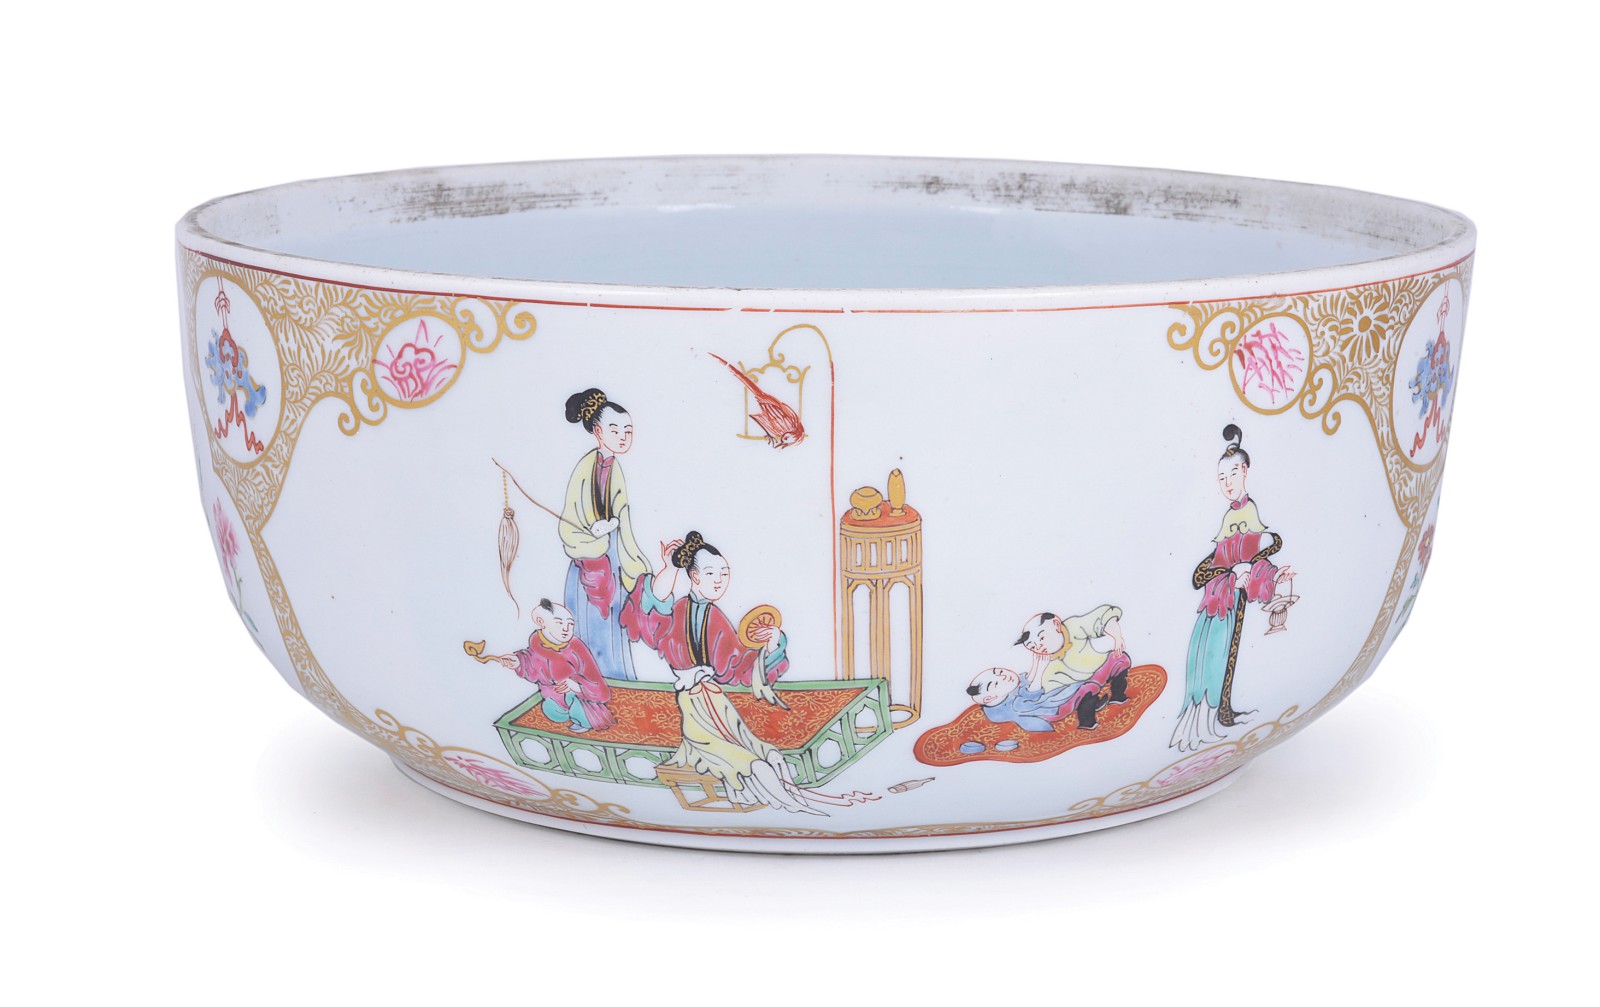 A SAMSON PORCELAIN BOWL OR CACHE-POT, CIRCA 1900 in Chinese export style with panels of figures or